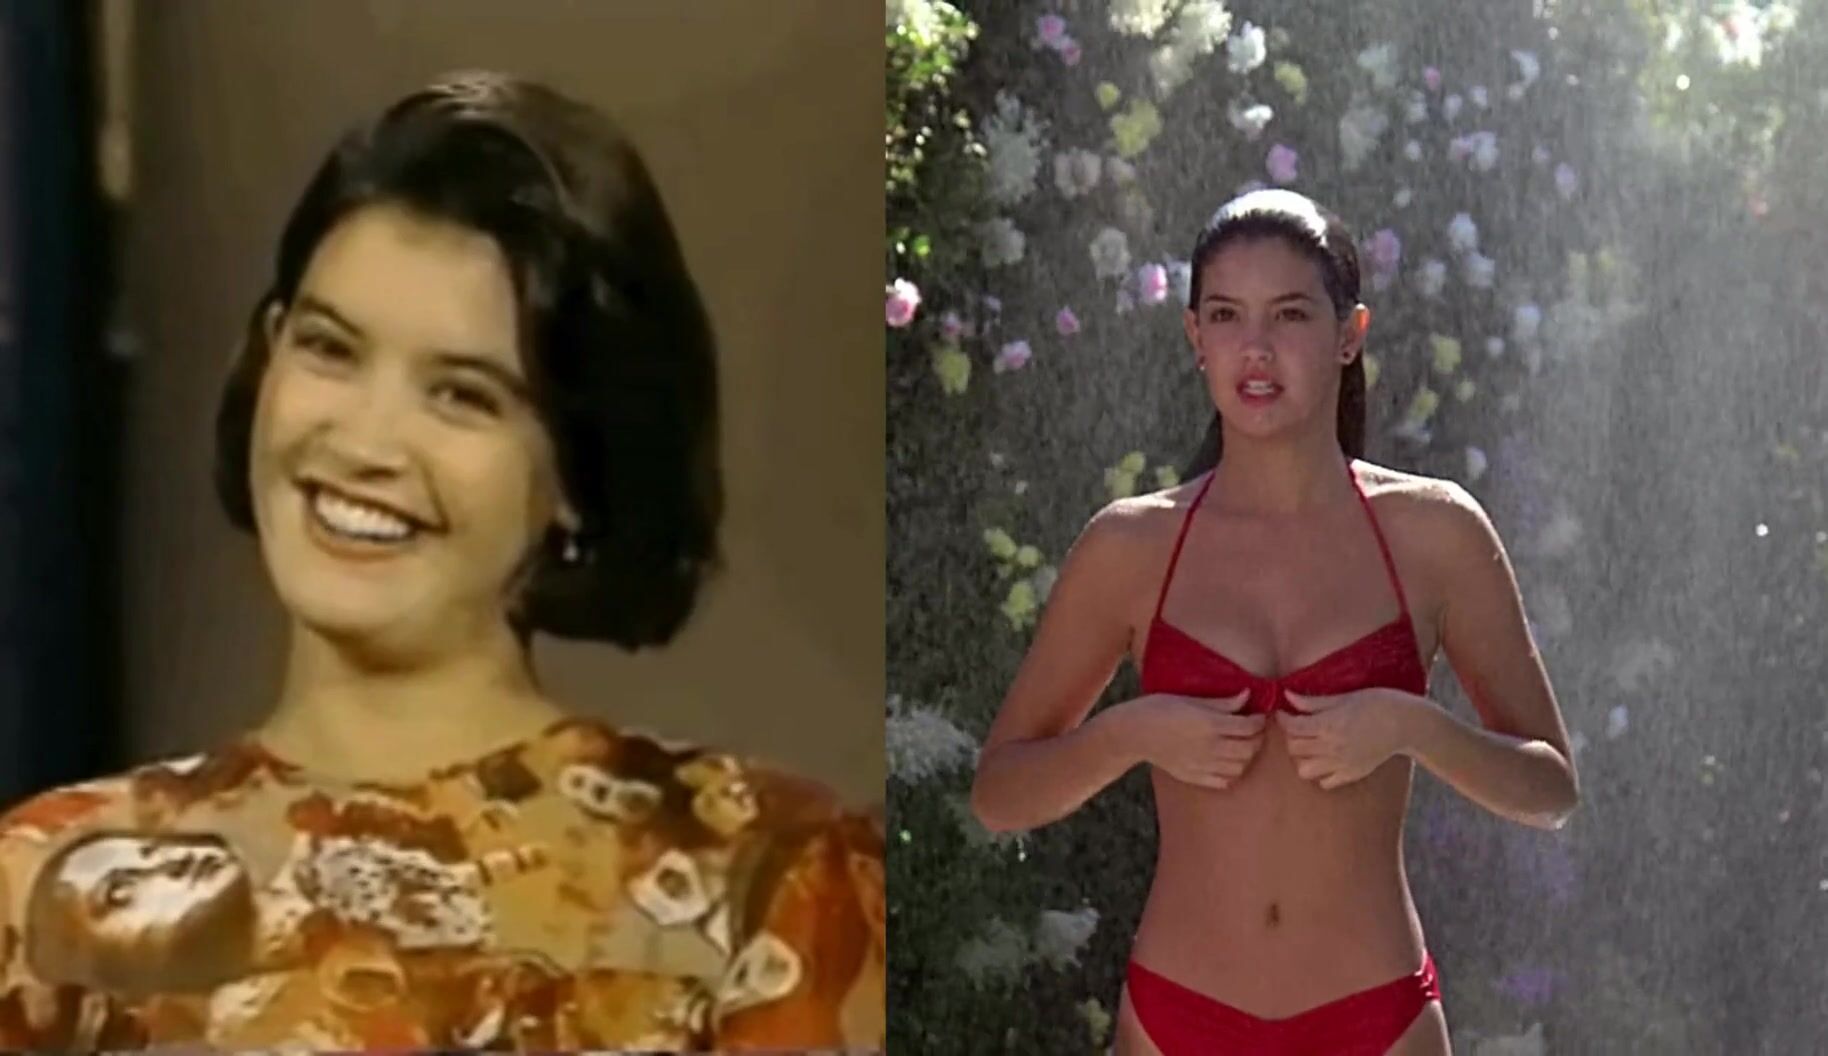 Phoebe Cates side by side.